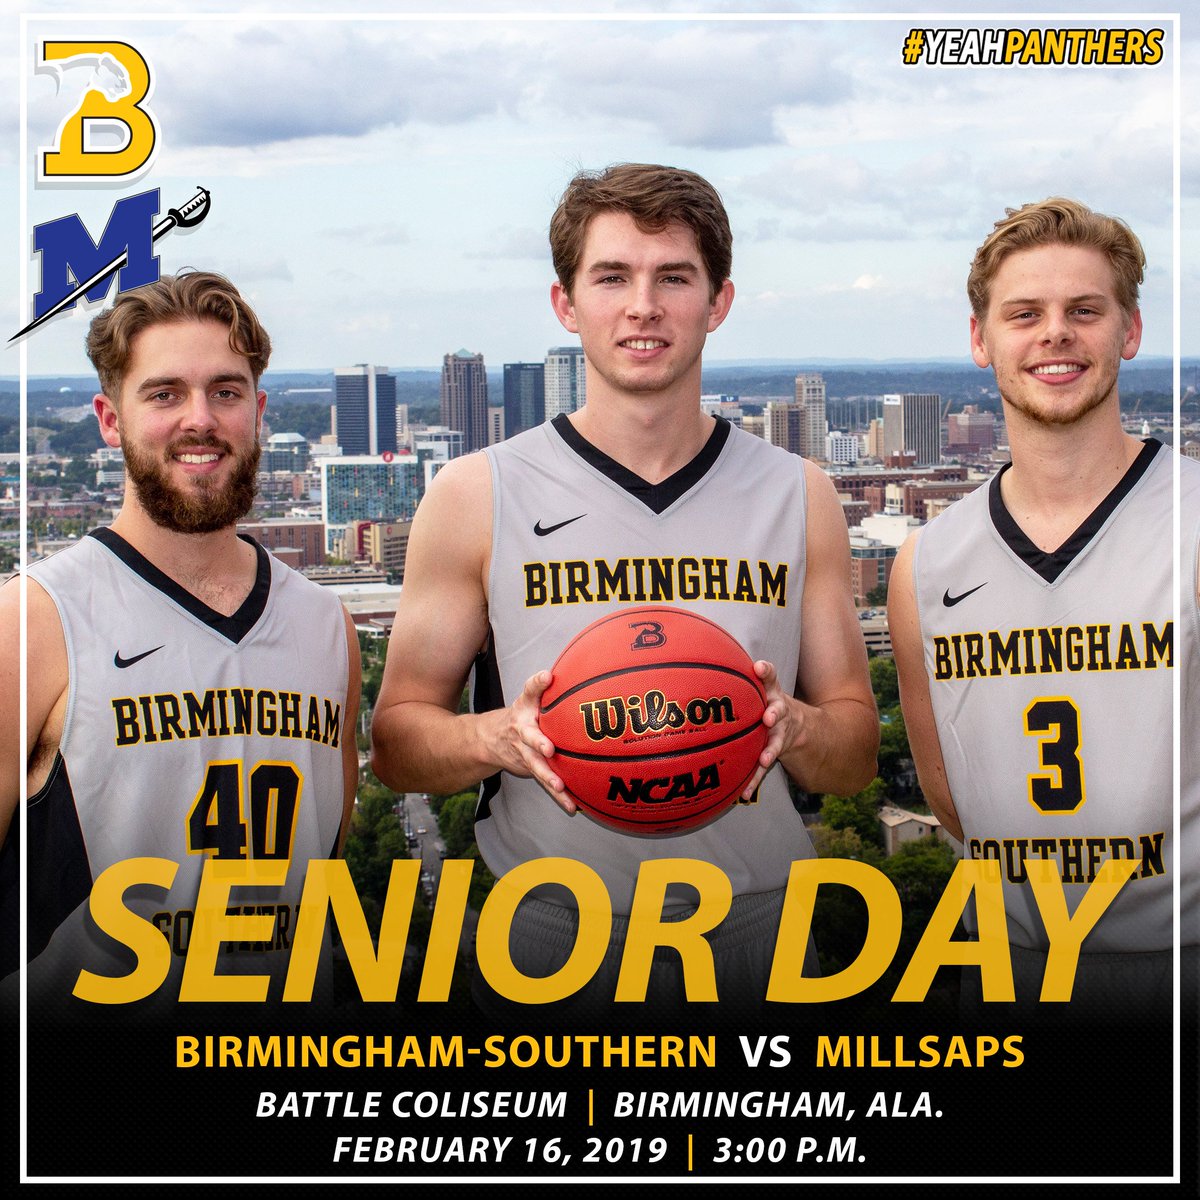 The Panthers take on Millsaps in the regular season finale today! It's also Senior Day for @bschoops! We hope to see you out on the Hilltop today! #yeahpanthers